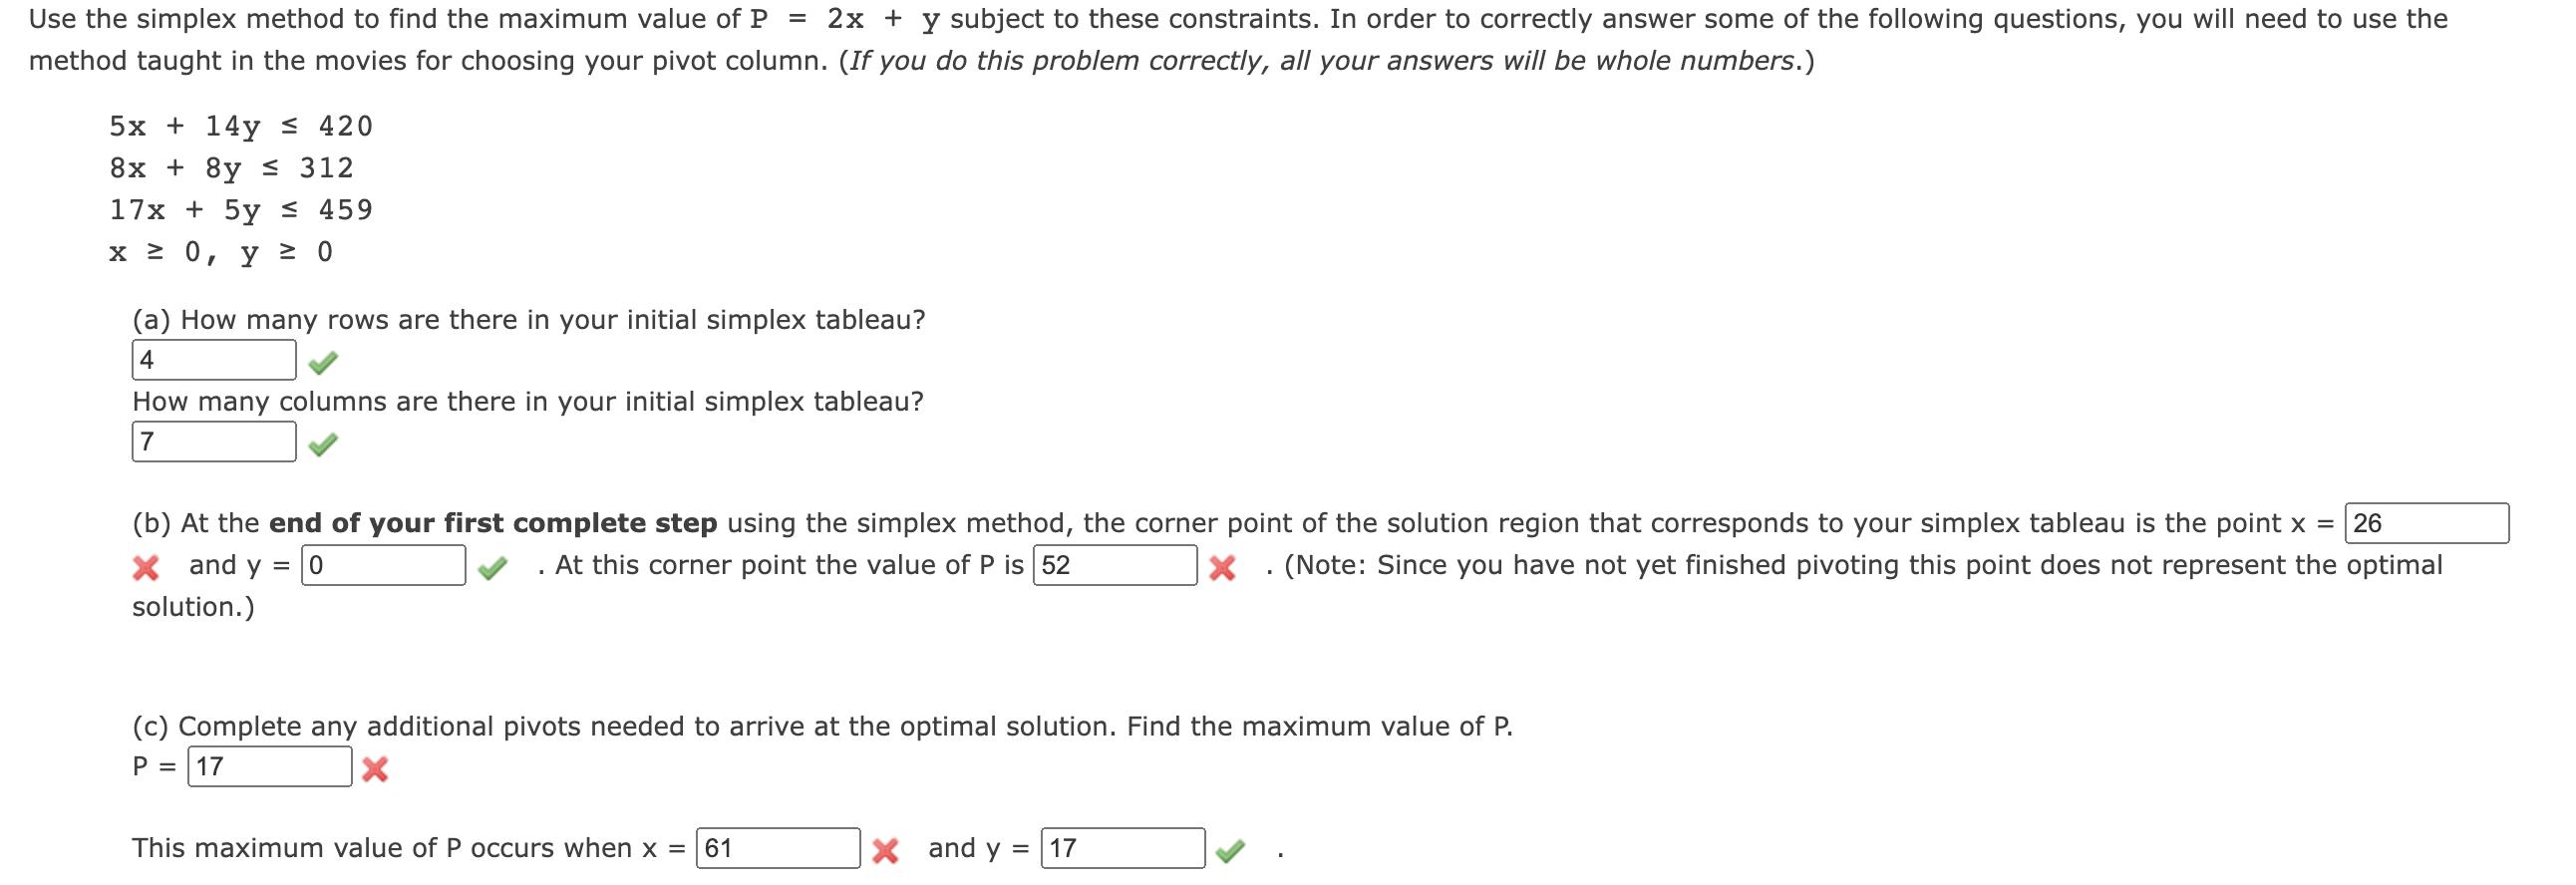 ie the simplex method to find the maximum value of \( P=2 x+y \) subject to these constraints. In order to correctly answer s